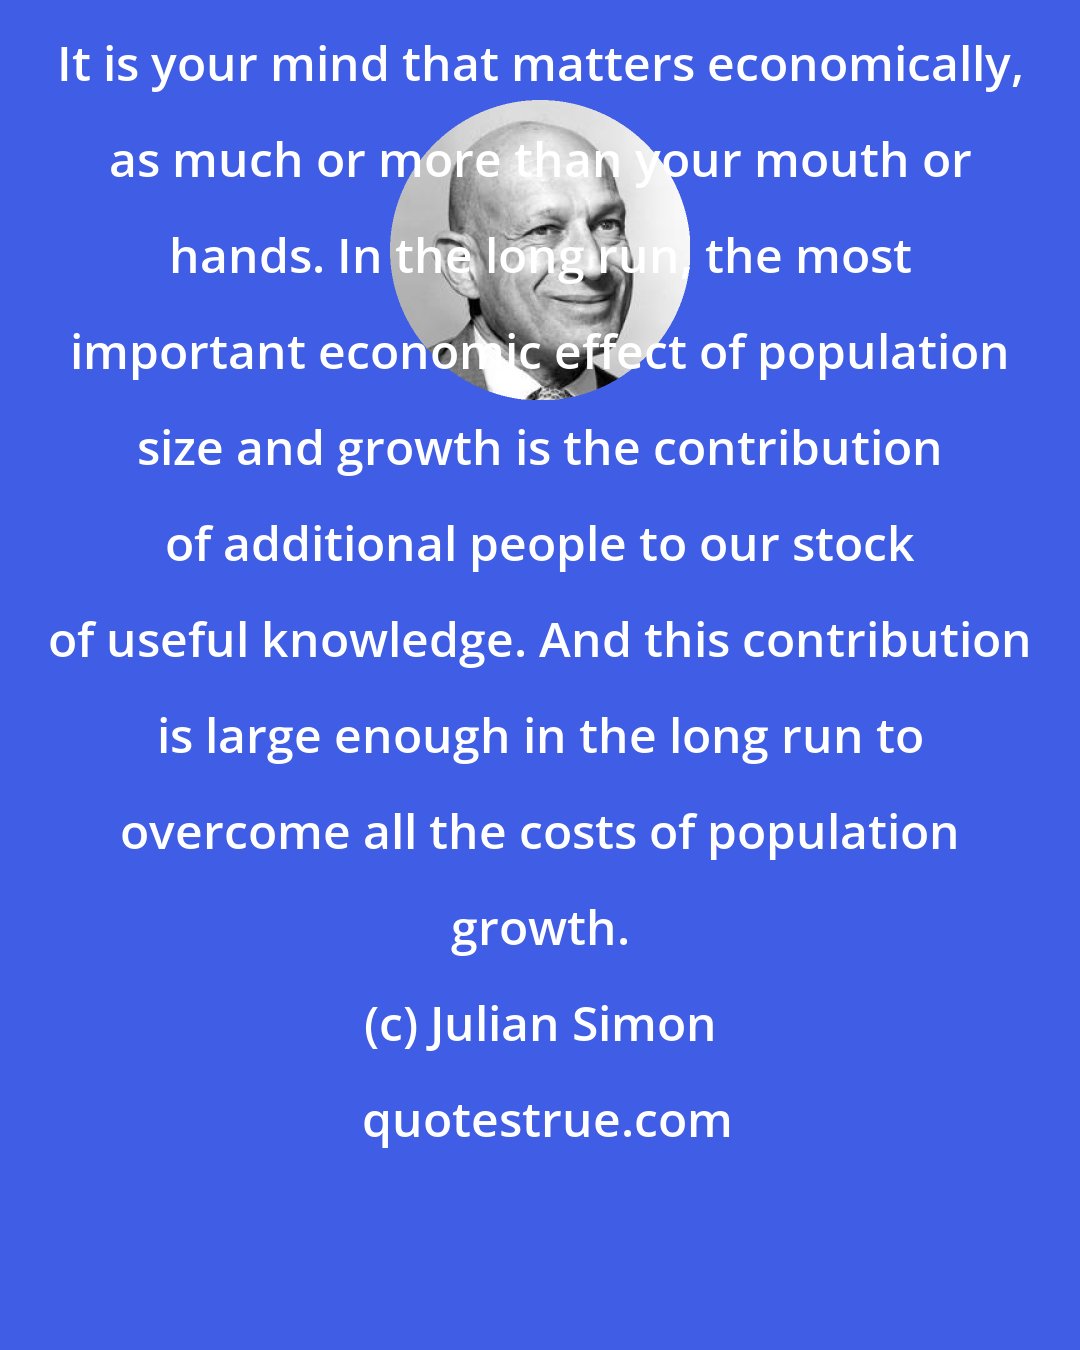 Julian Simon: It is your mind that matters economically, as much or more than your mouth or hands. In the long run, the most important economic effect of population size and growth is the contribution of additional people to our stock of useful knowledge. And this contribution is large enough in the long run to overcome all the costs of population growth.